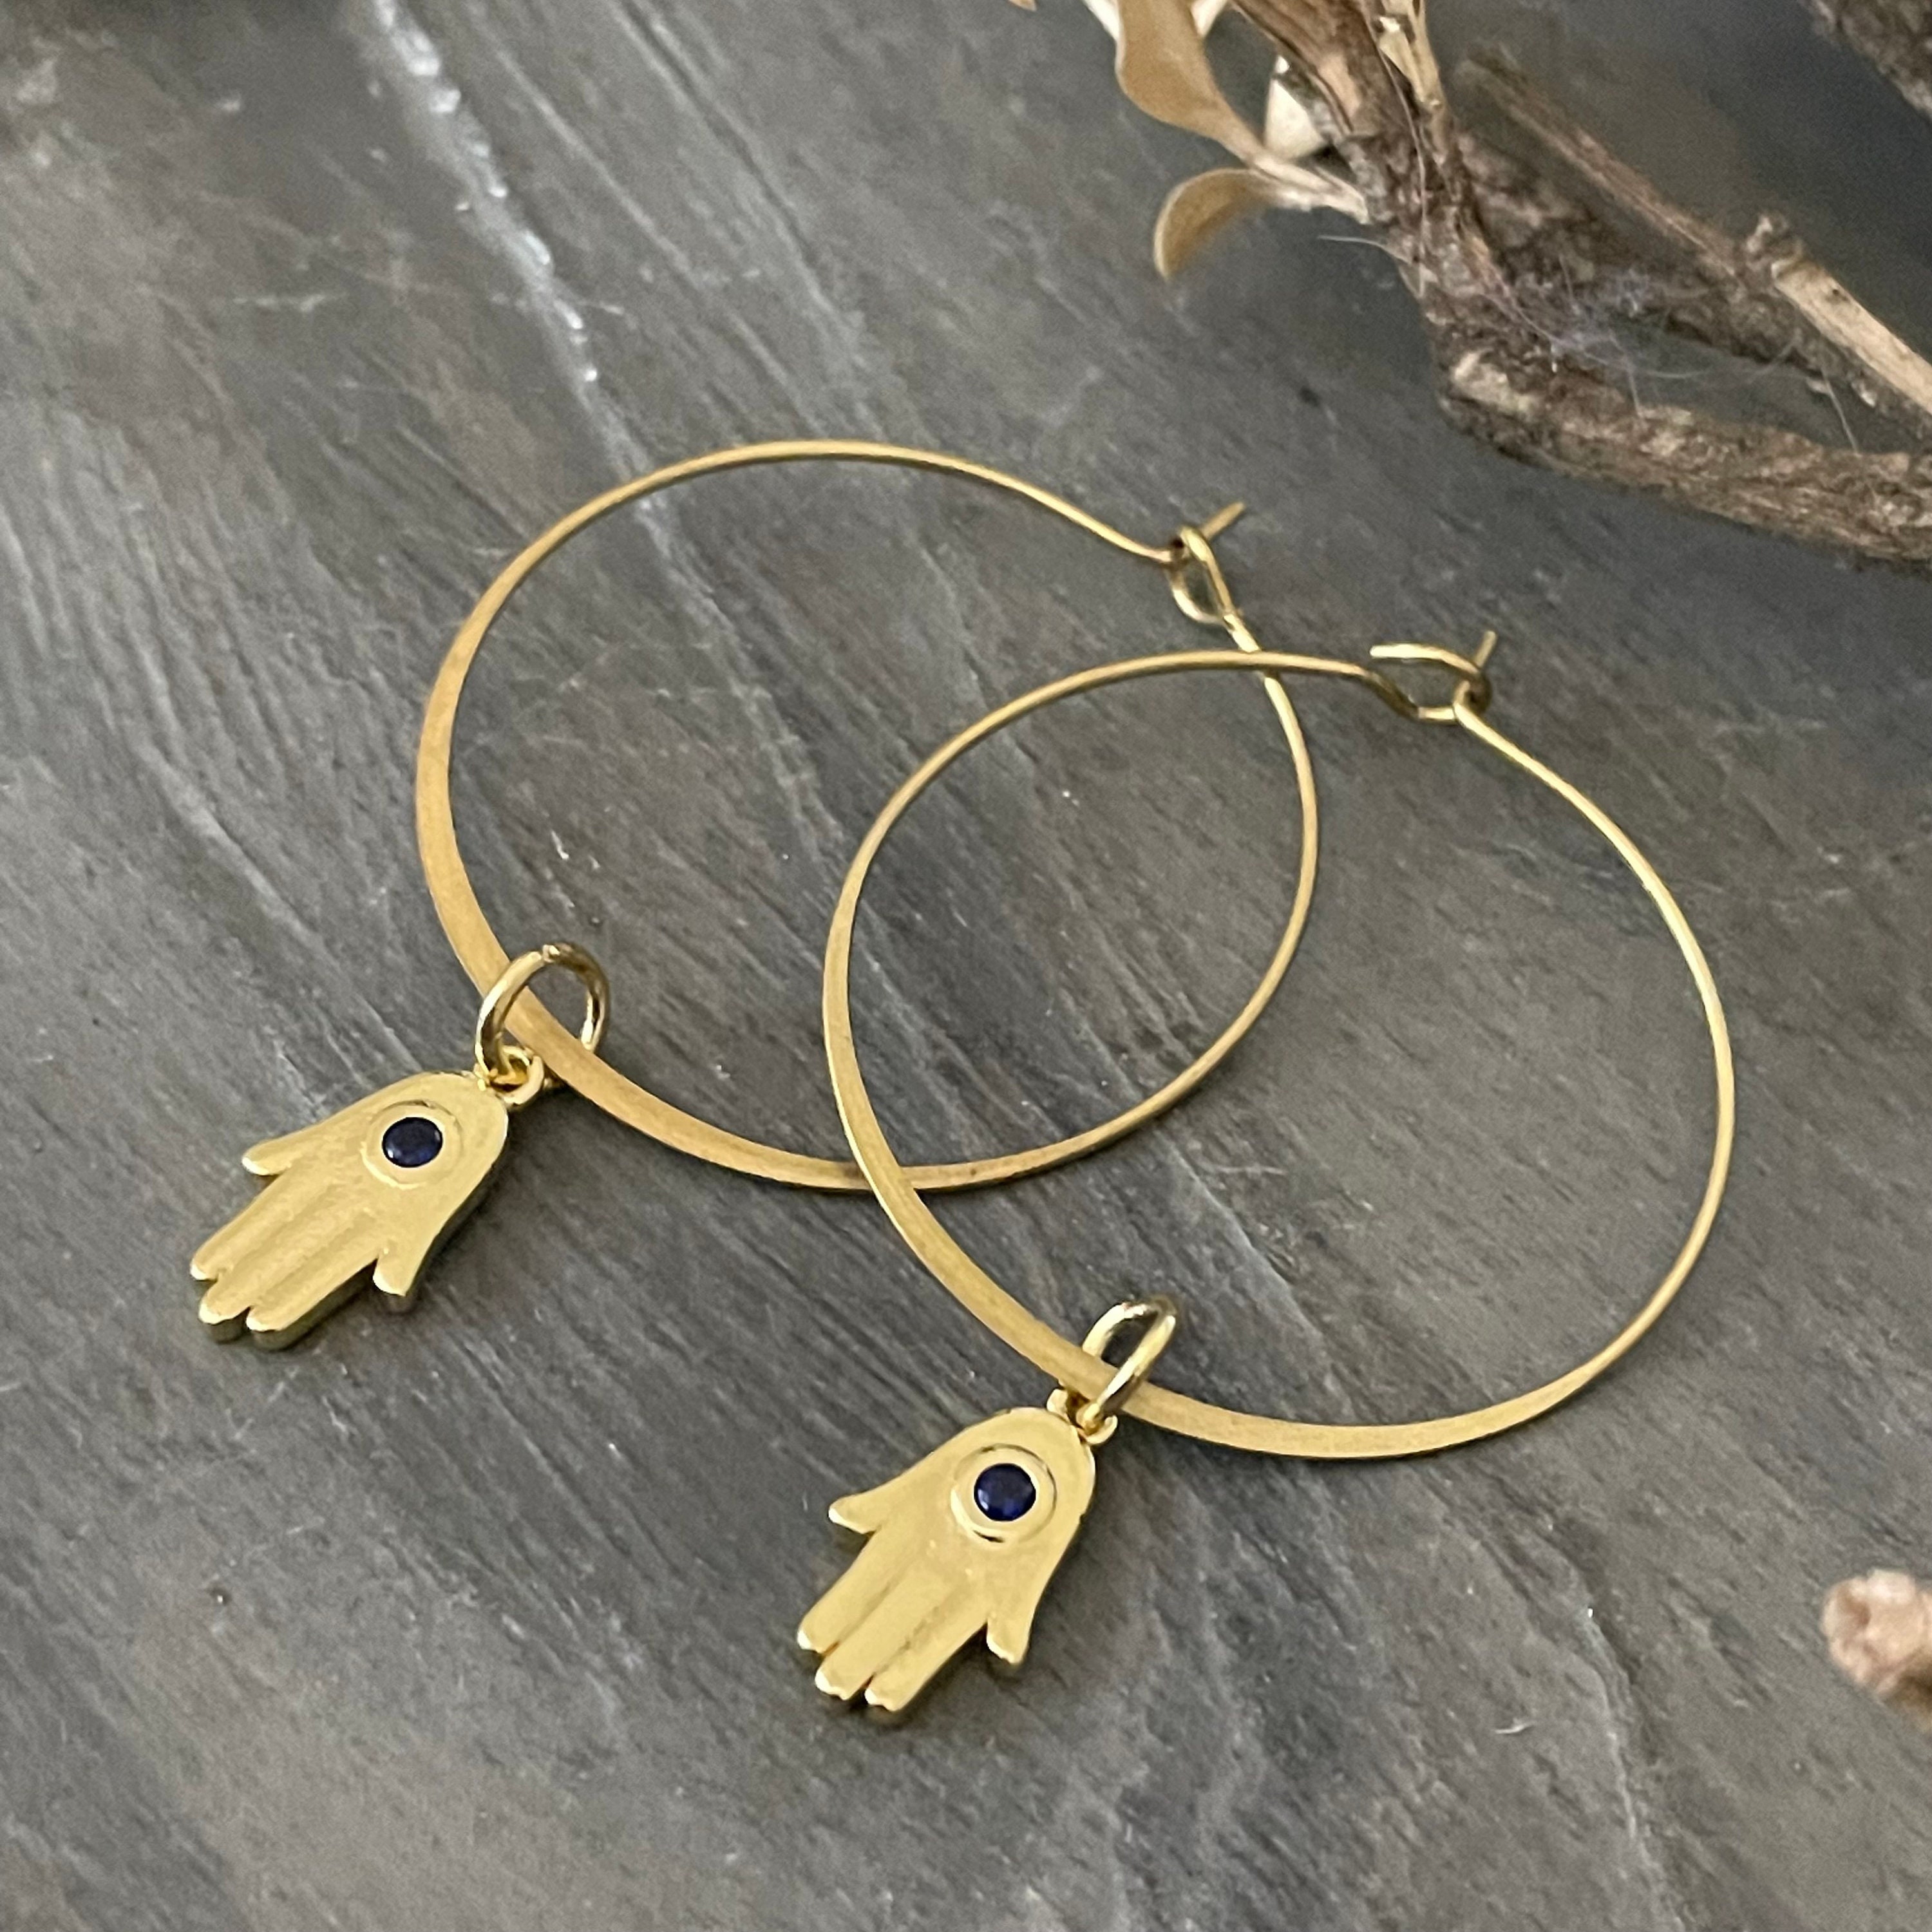 Lotus Drops Brass Jewelry Findings One Set, Endless Possibilities